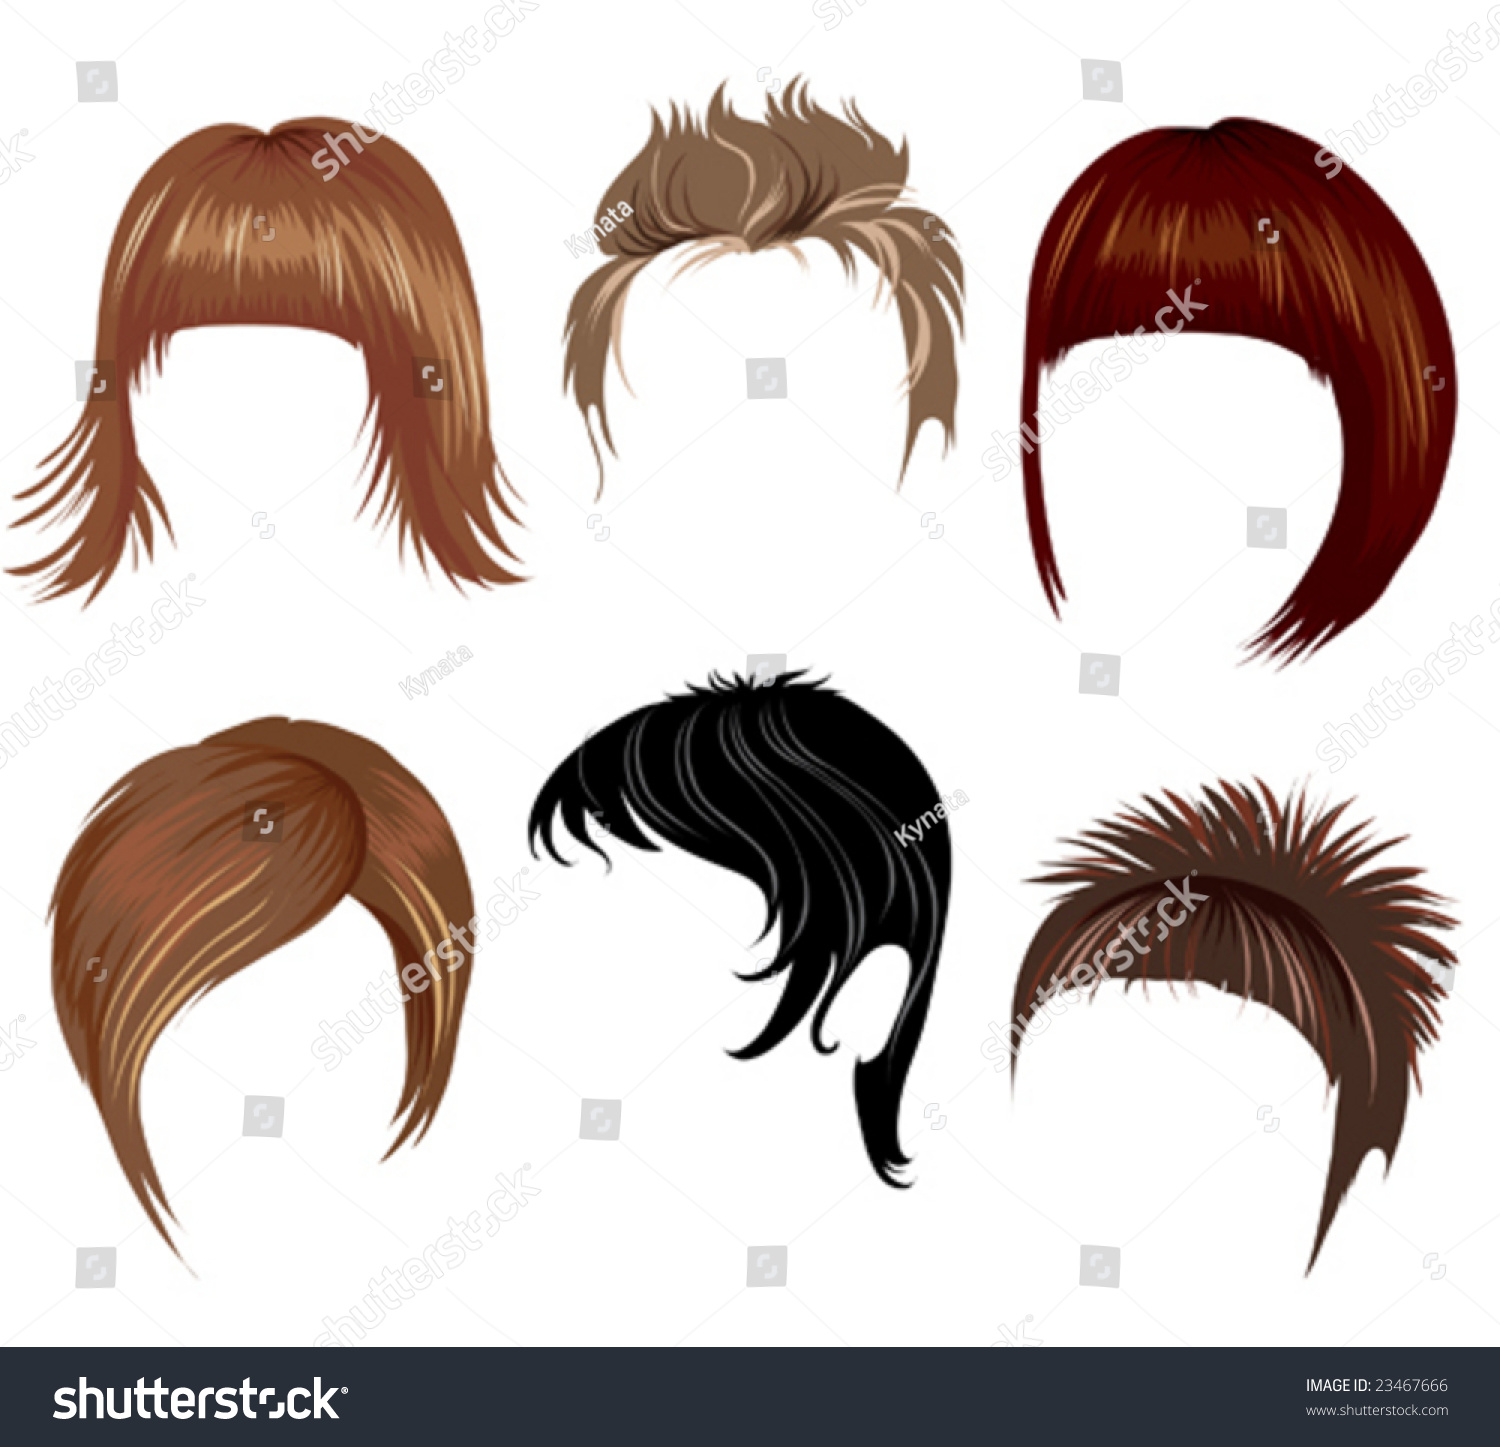 Set Of Hair Styling For Woman Stock Vector Illustration 23467666